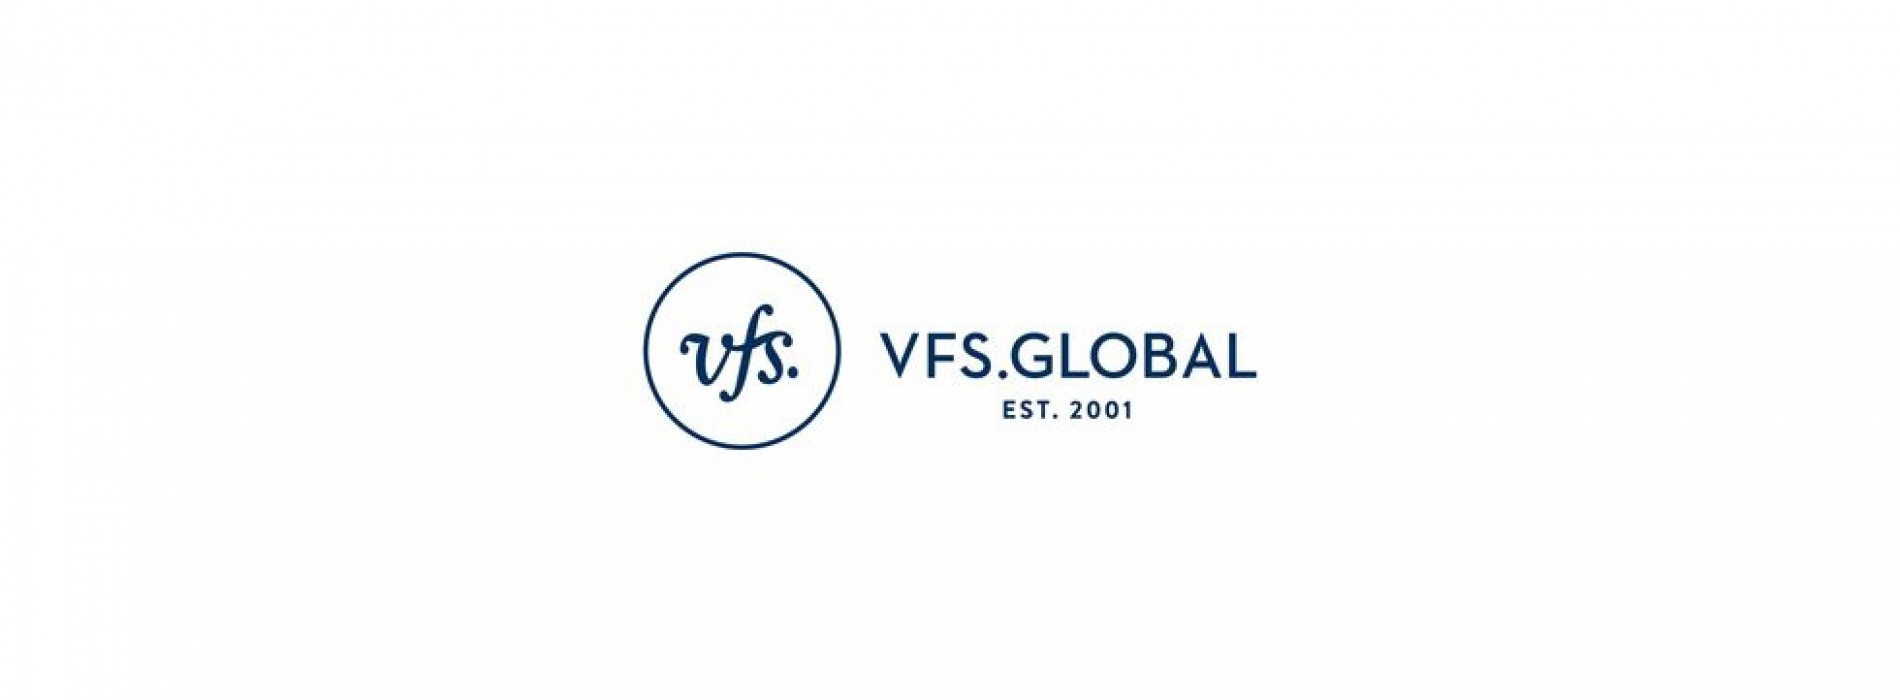 VFS Global wins contract to process Norway visa applications in 39 countries